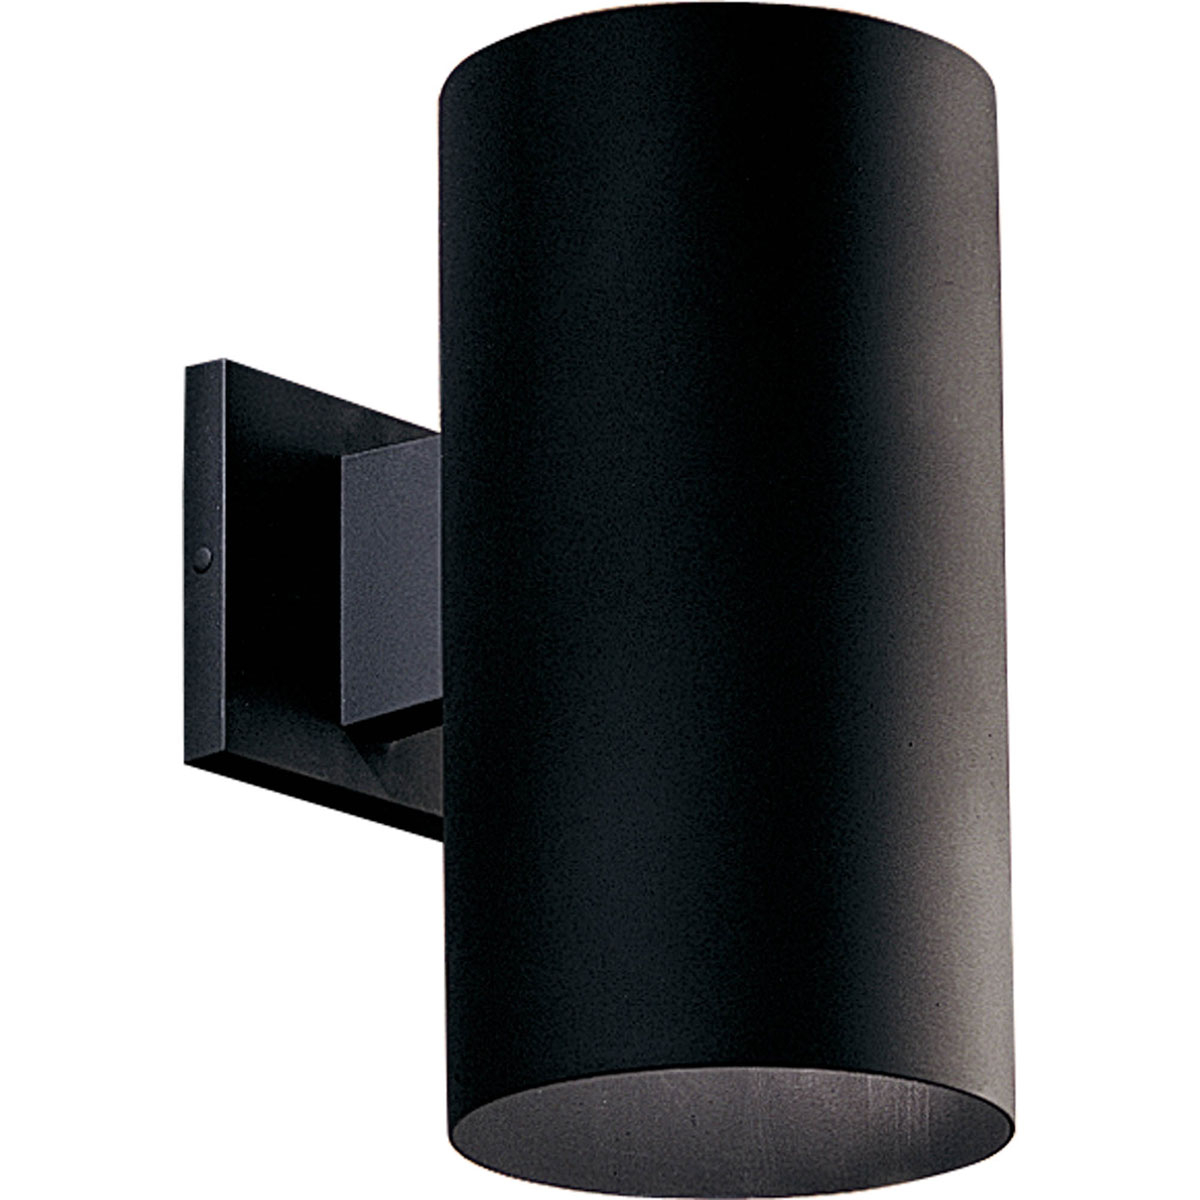 6 in downlight wall cylinders are ideal for a wide variety of interior and exterior applications including residential and commercial. The aluminum Cylinders offers a contemporary design with its sleek cylindrical form and elegant fade and chip resistant Black finish, perfect for today's inspired exteriors. With over 1,050 lumens the LED Cylinders unite performance, energy savings and safety benefits.